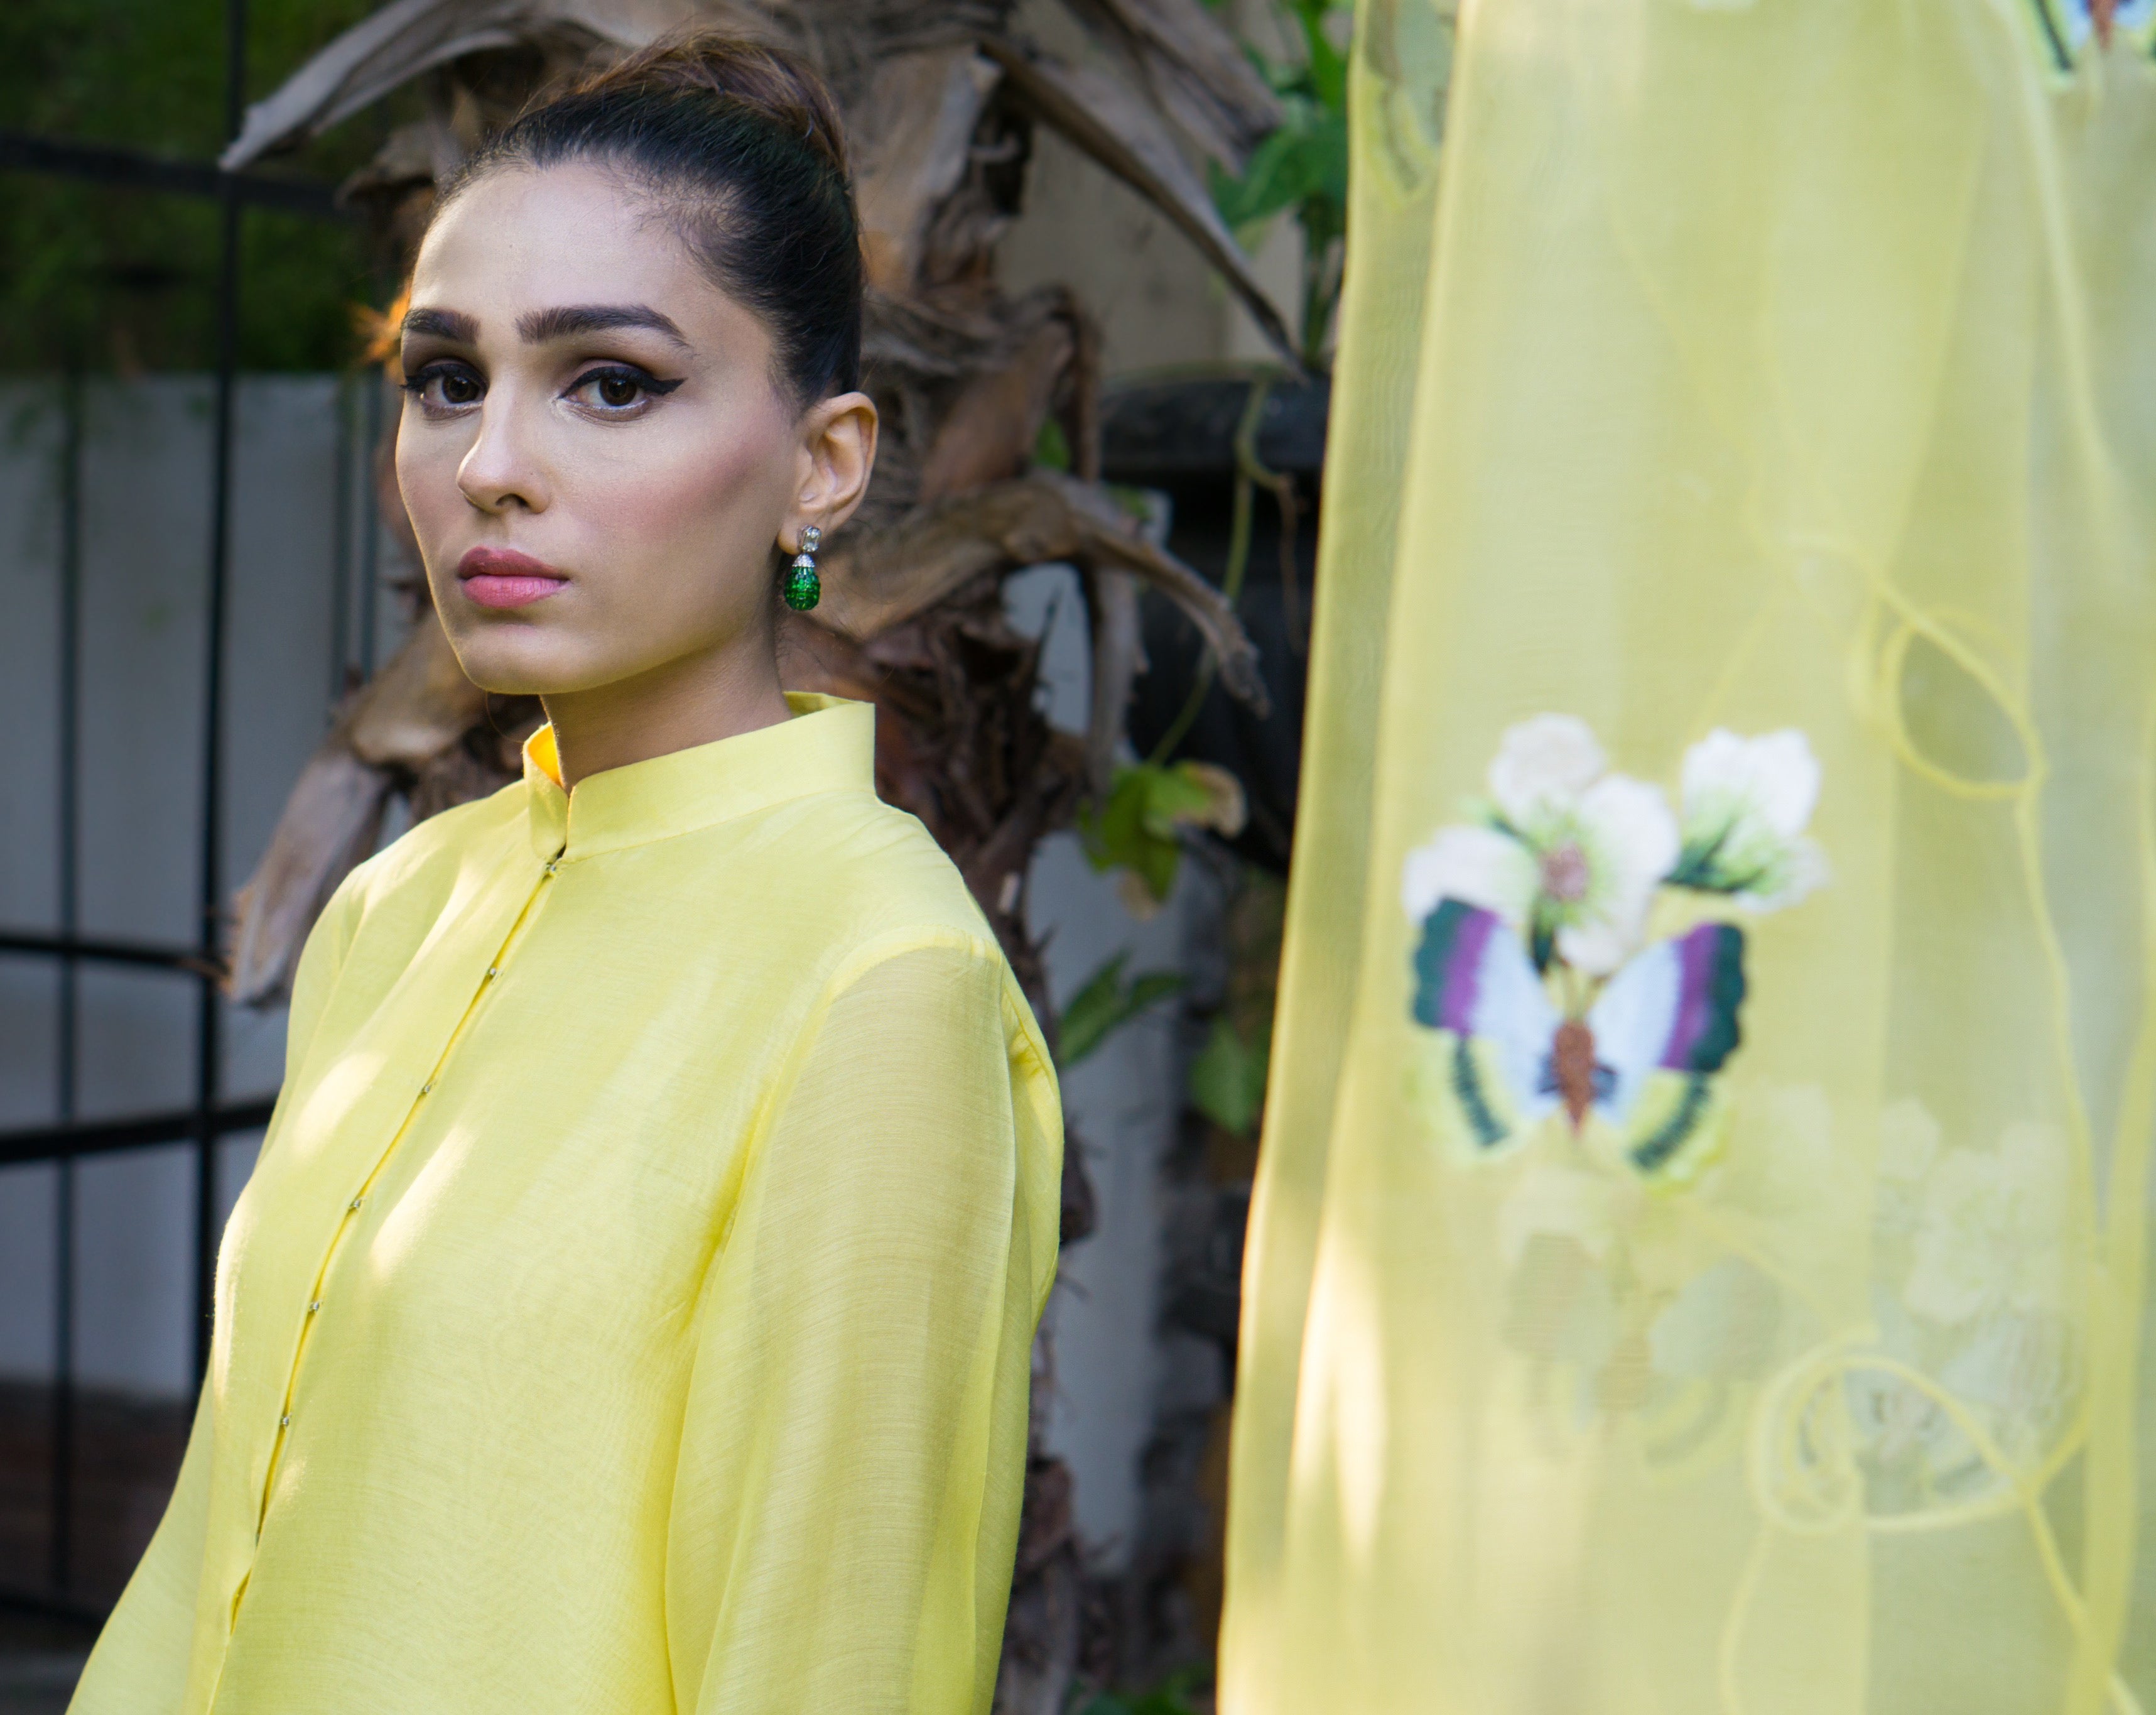 Eid Collection'23 by IVY